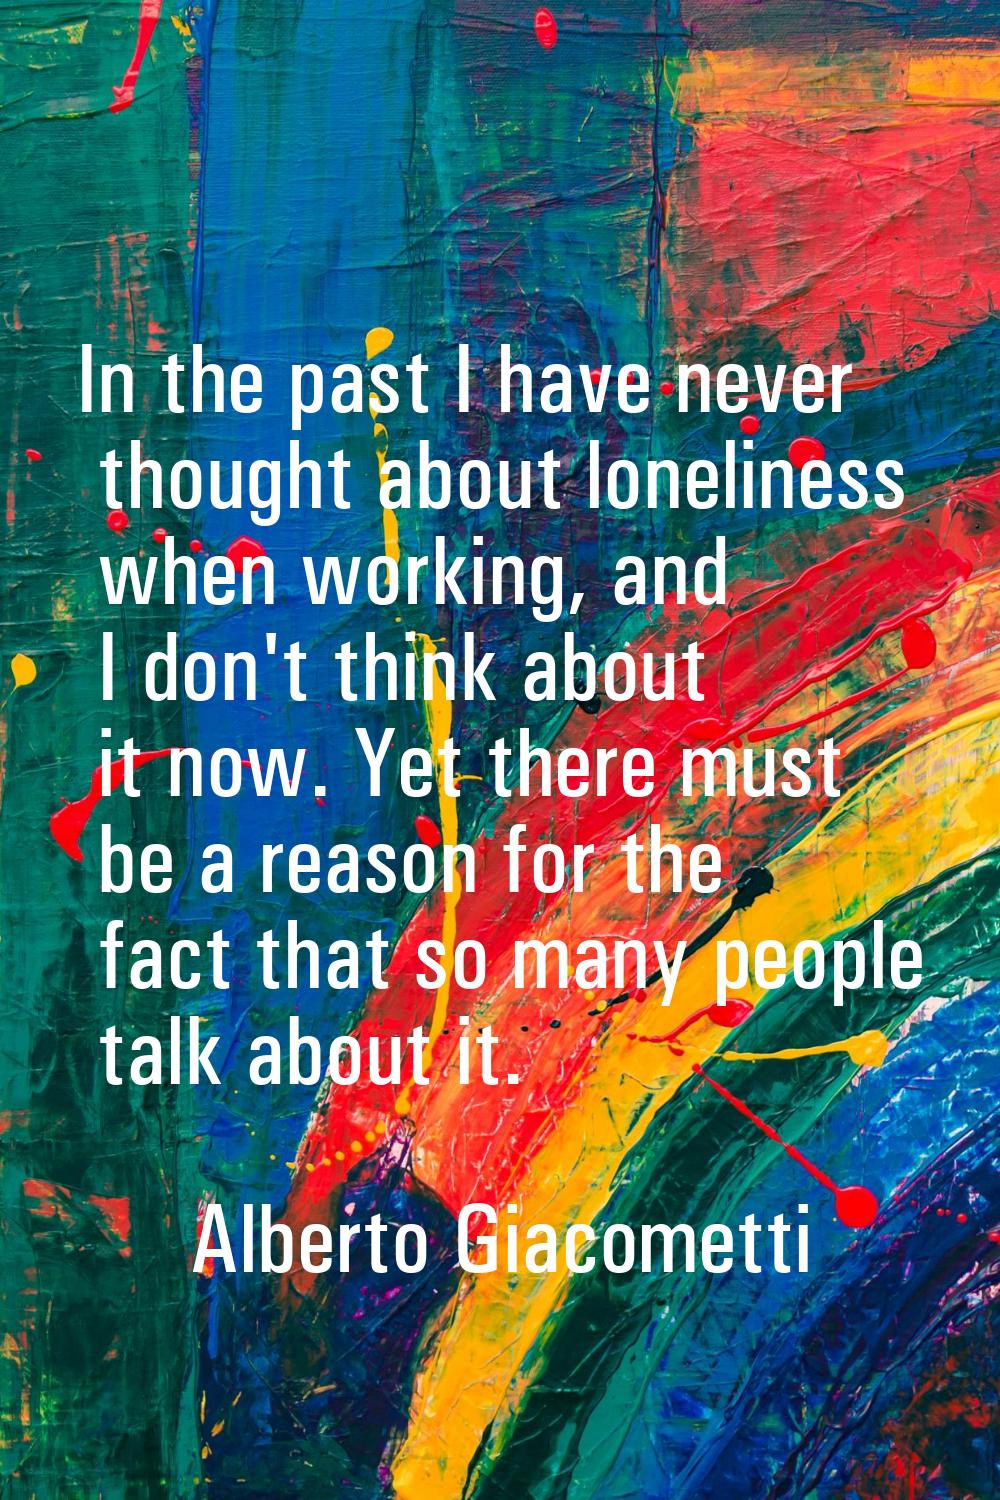 In the past I have never thought about loneliness when working, and I don't think about it now. Yet